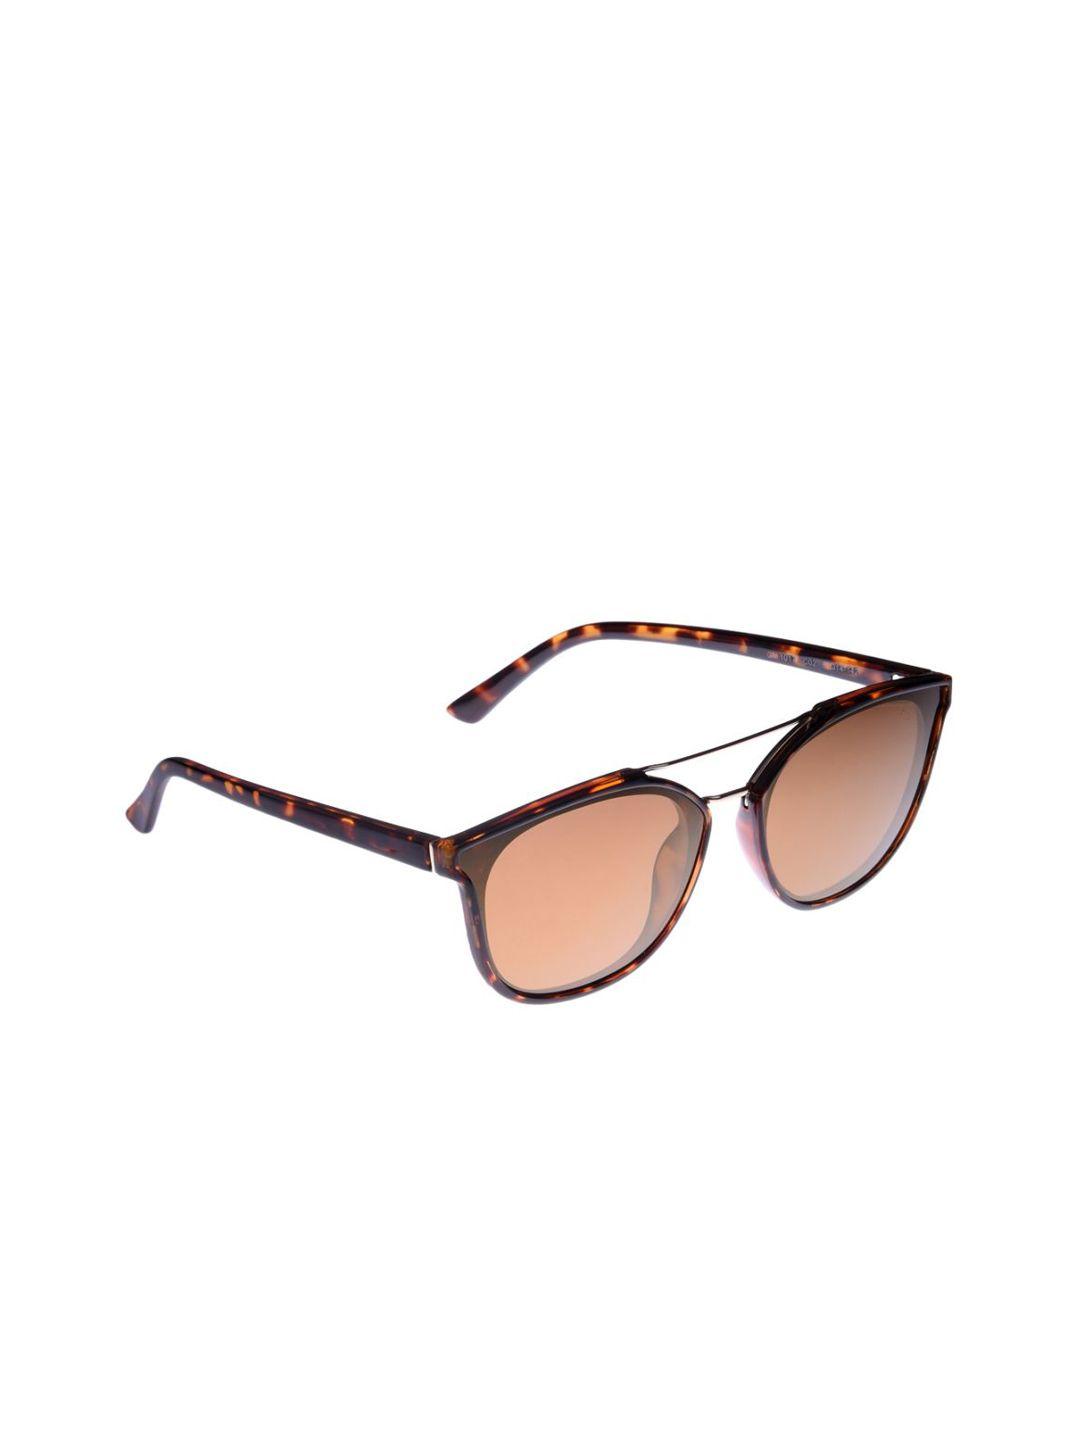 gio collection unisex oval sunglasses gm1017c02